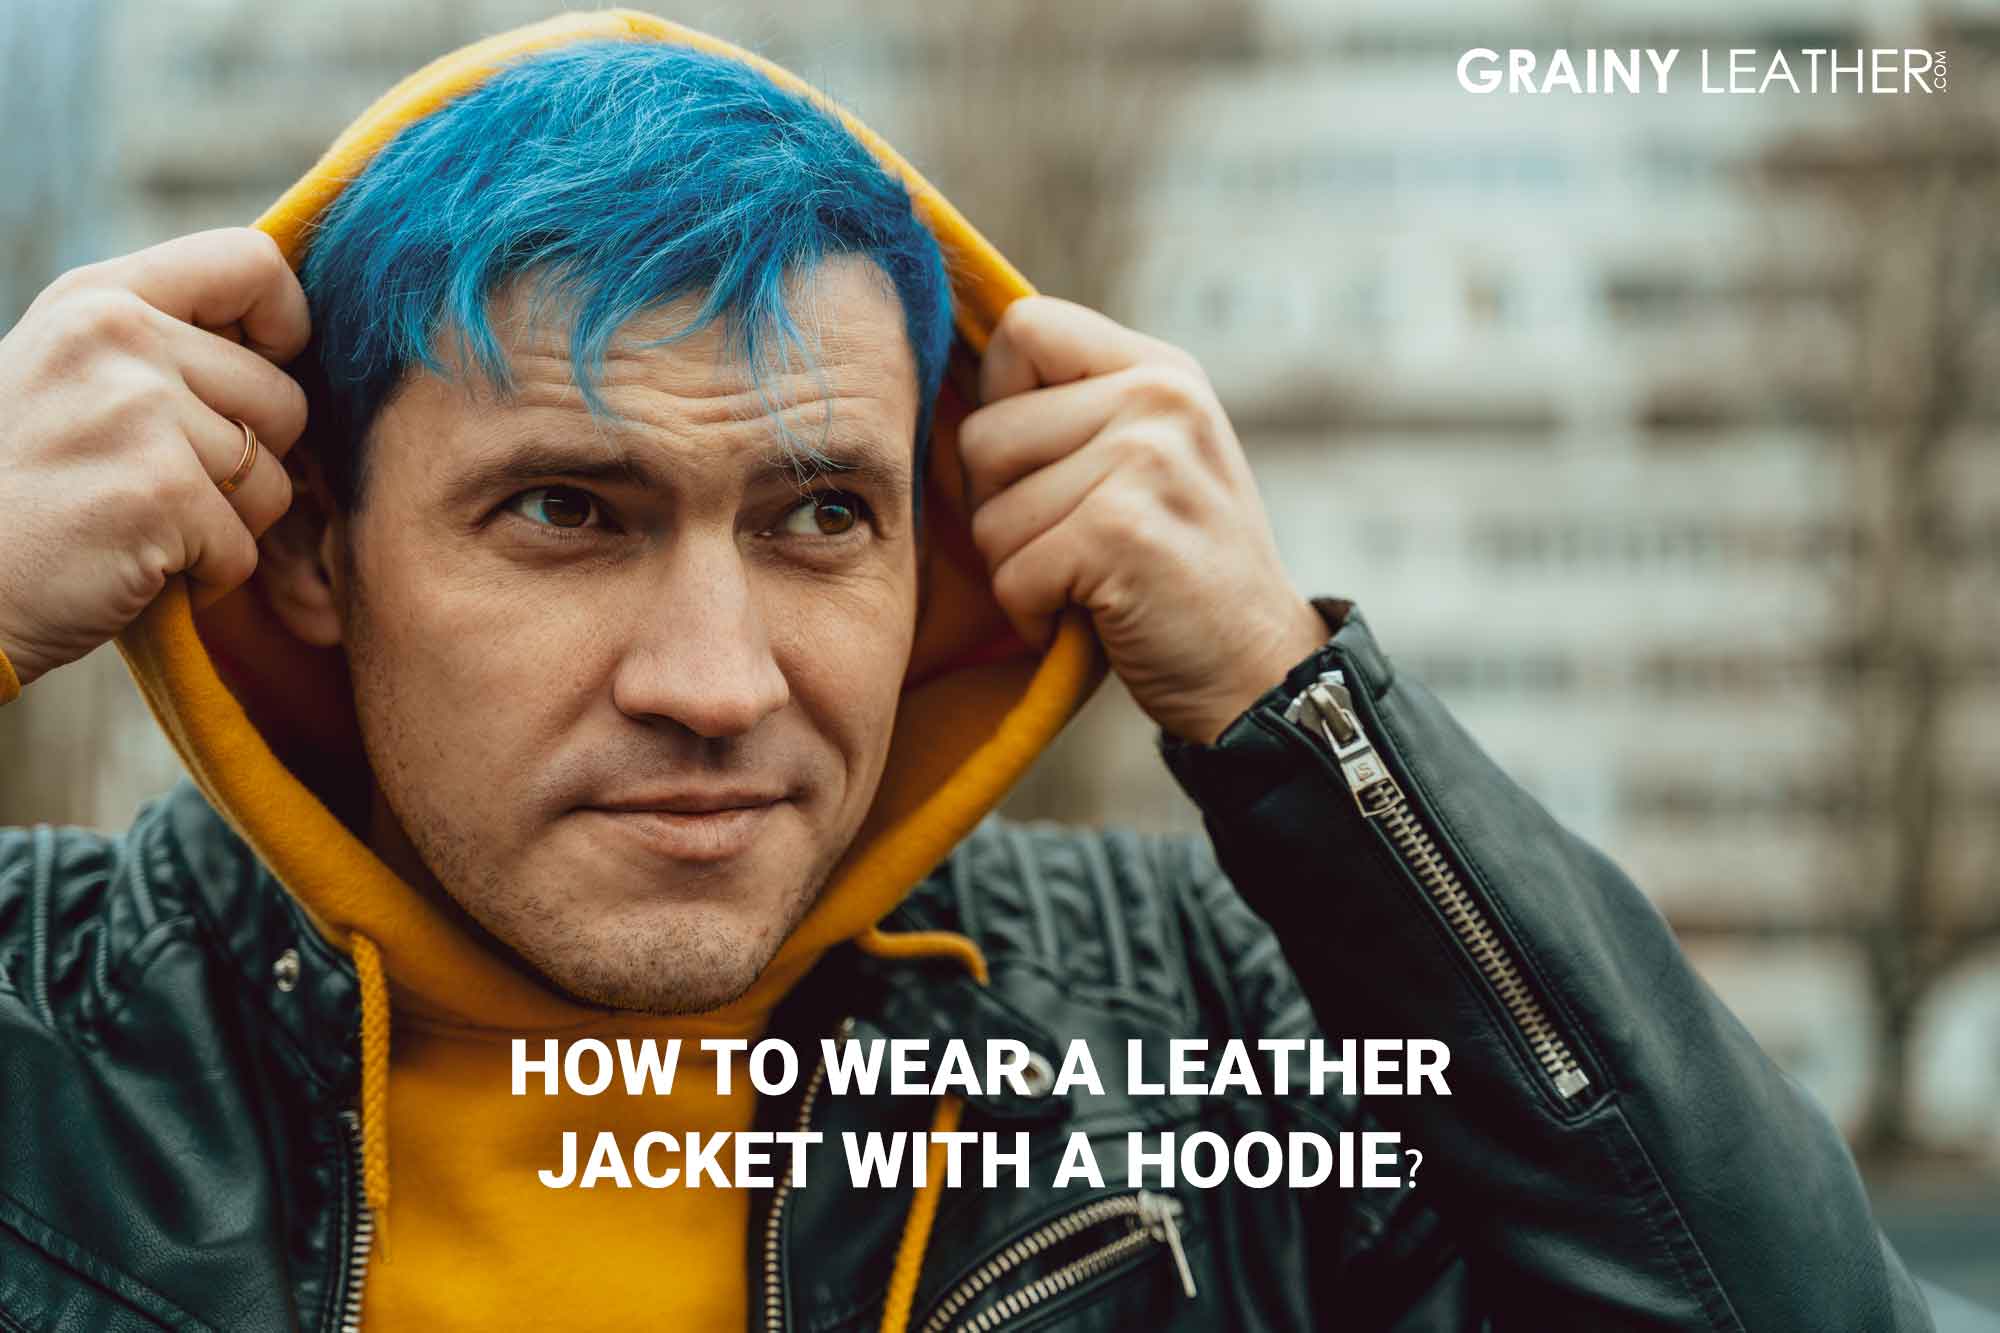 Ace the Trend - How to Wear a Leather Jacket With a Hoodie?